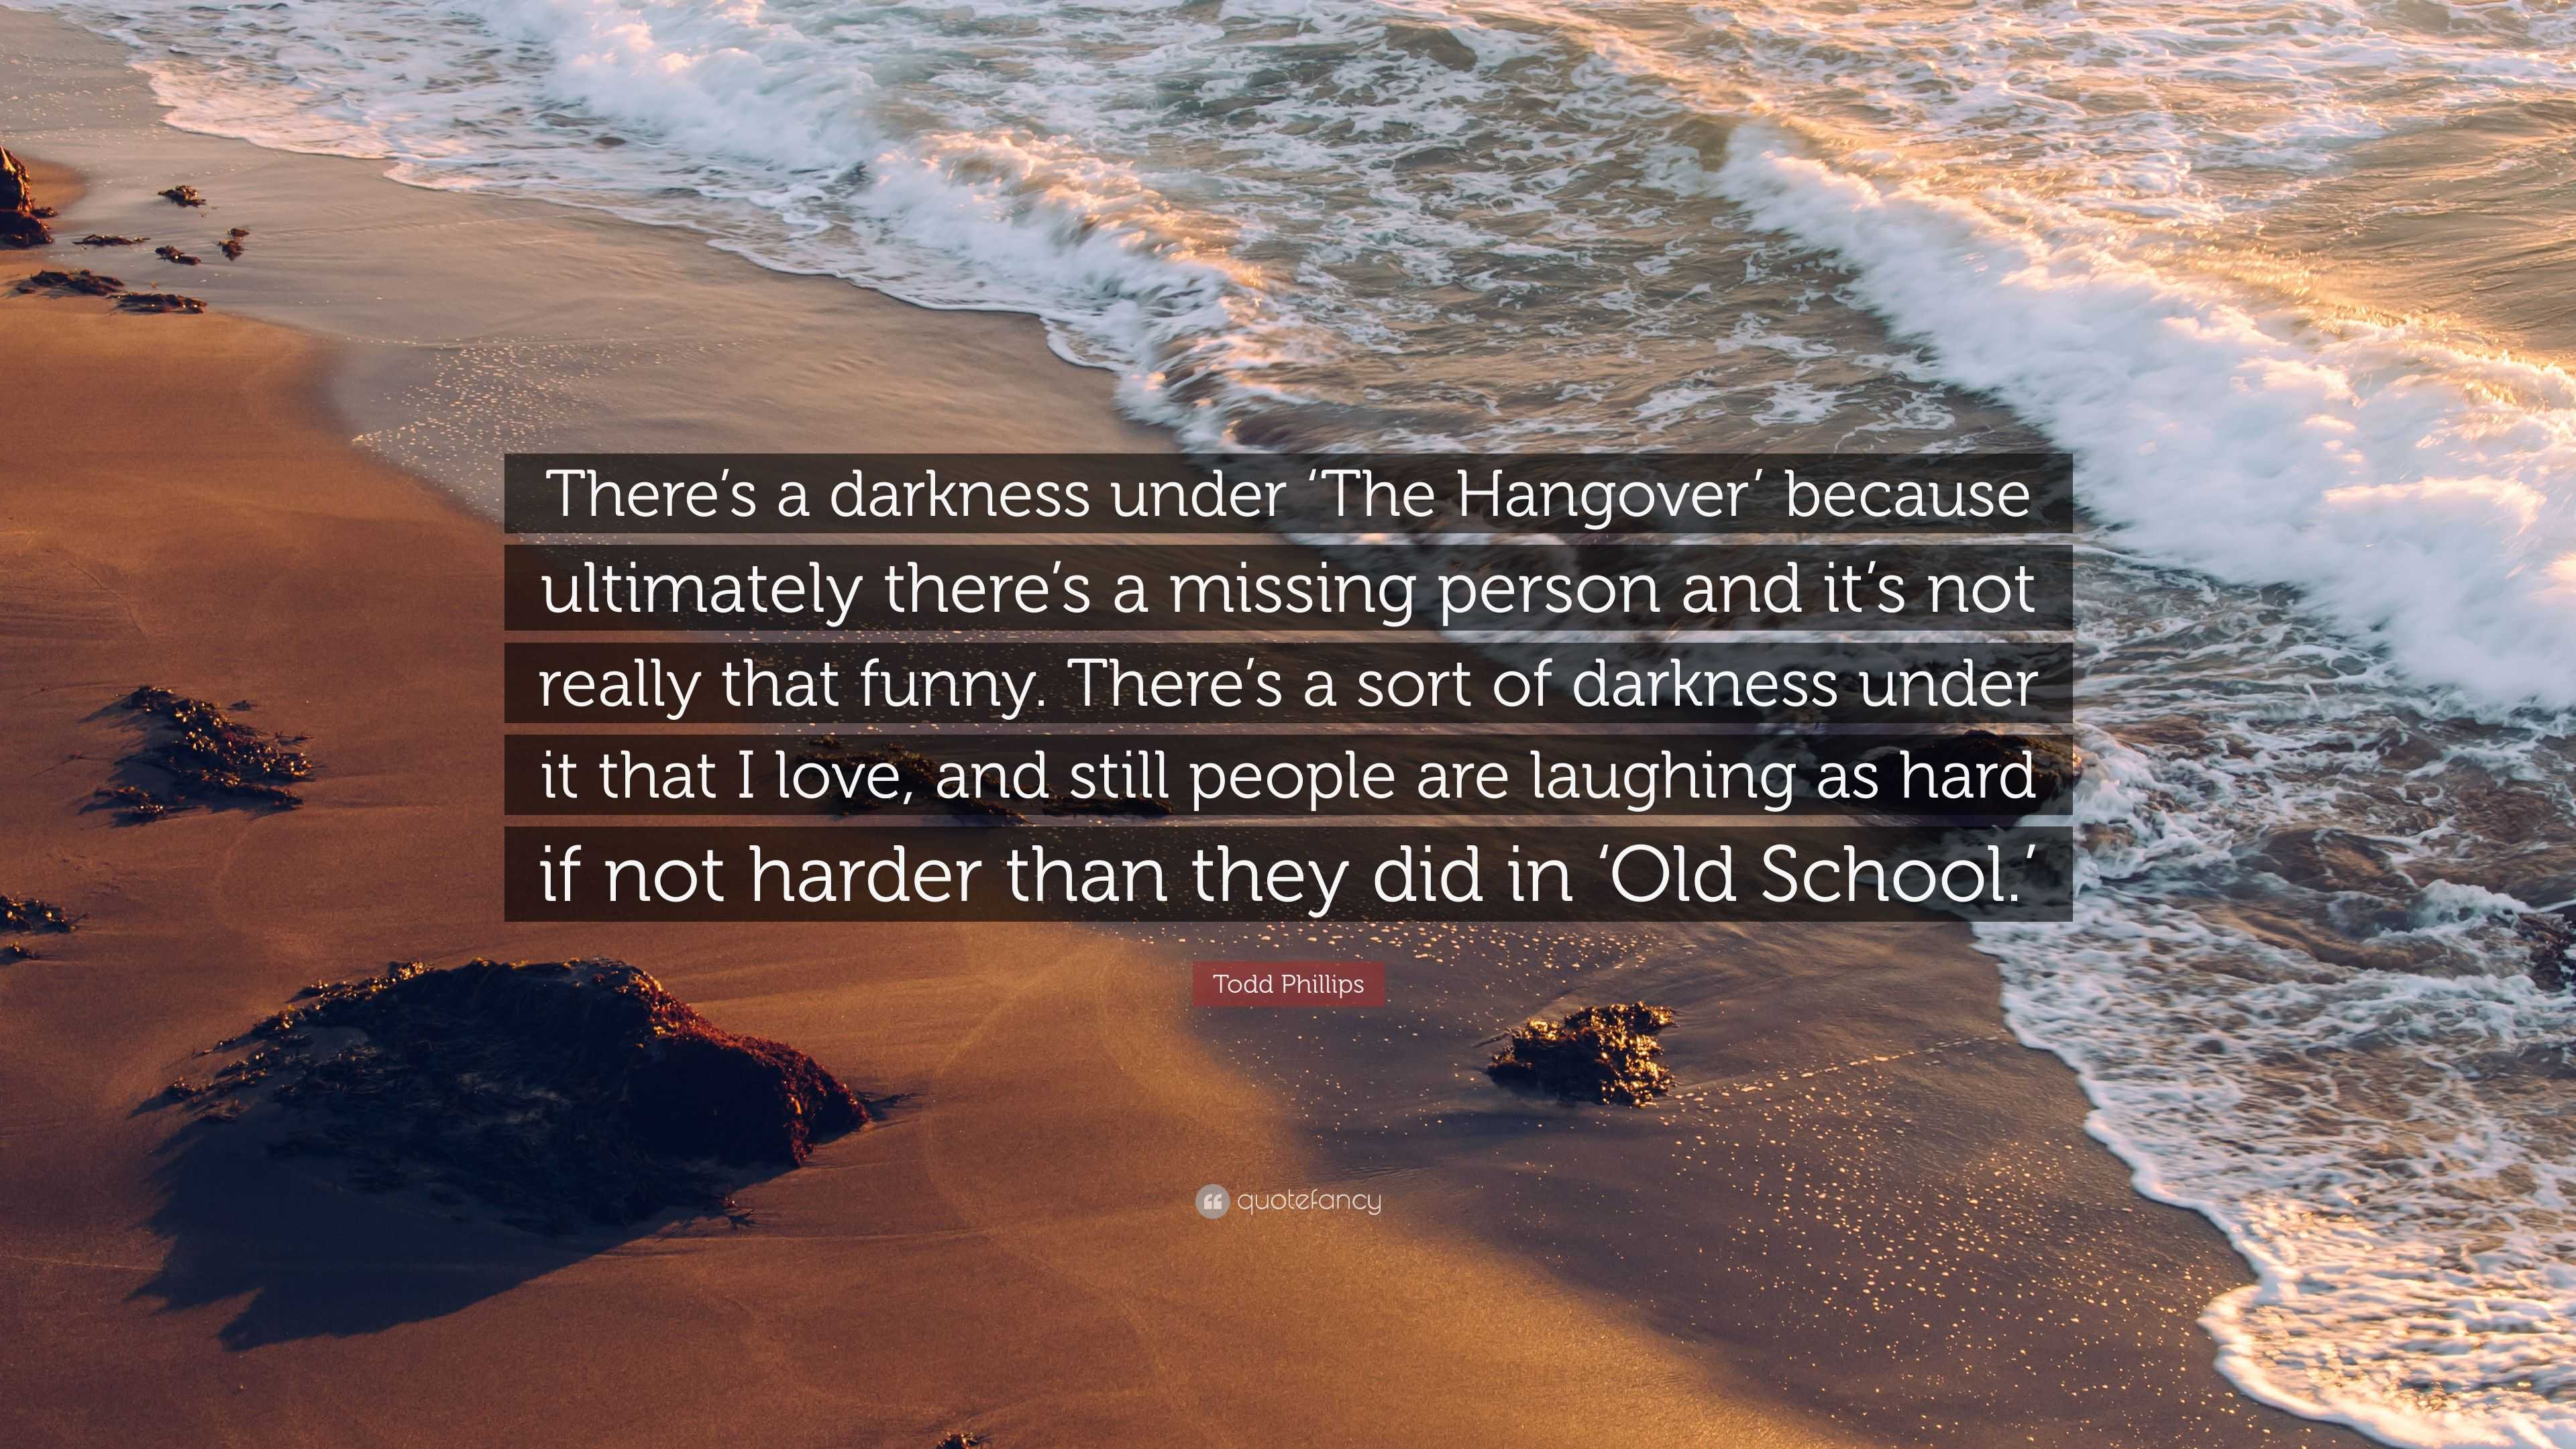 Todd Phillips Quote: “There's a darkness under 'The Hangover' because  ultimately there's a missing person and it's not really that funny. Ther...”